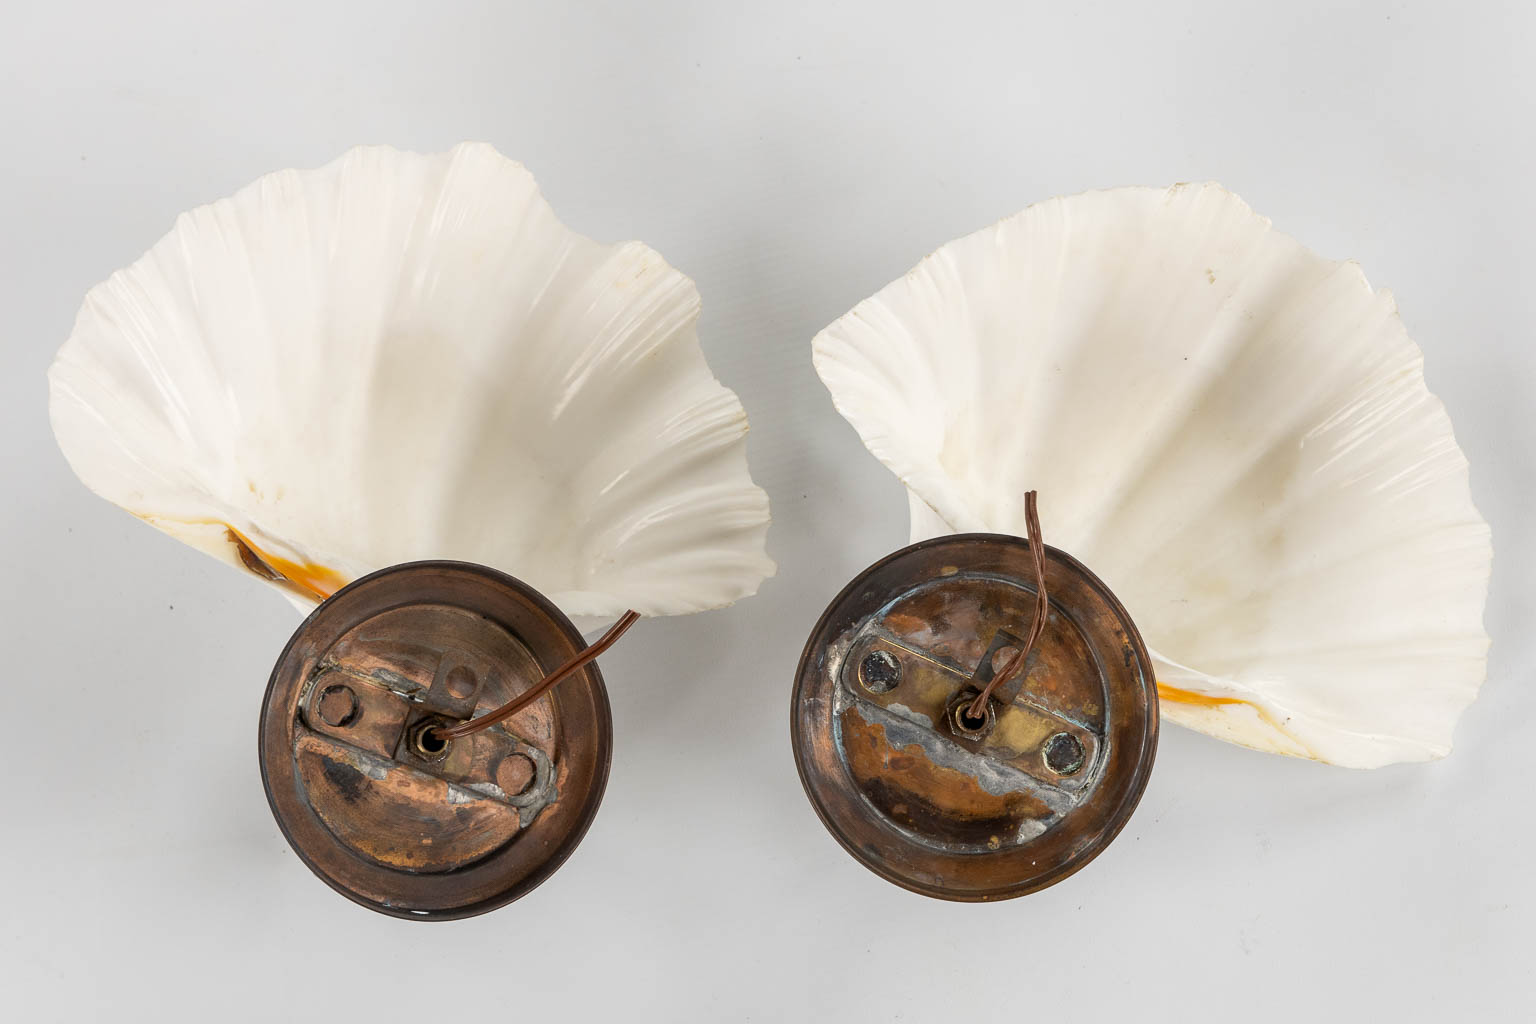 A decorative pair of walllamps, mounted on copper. Circa 1950. (L:13 x W:26 x H:25 cm)